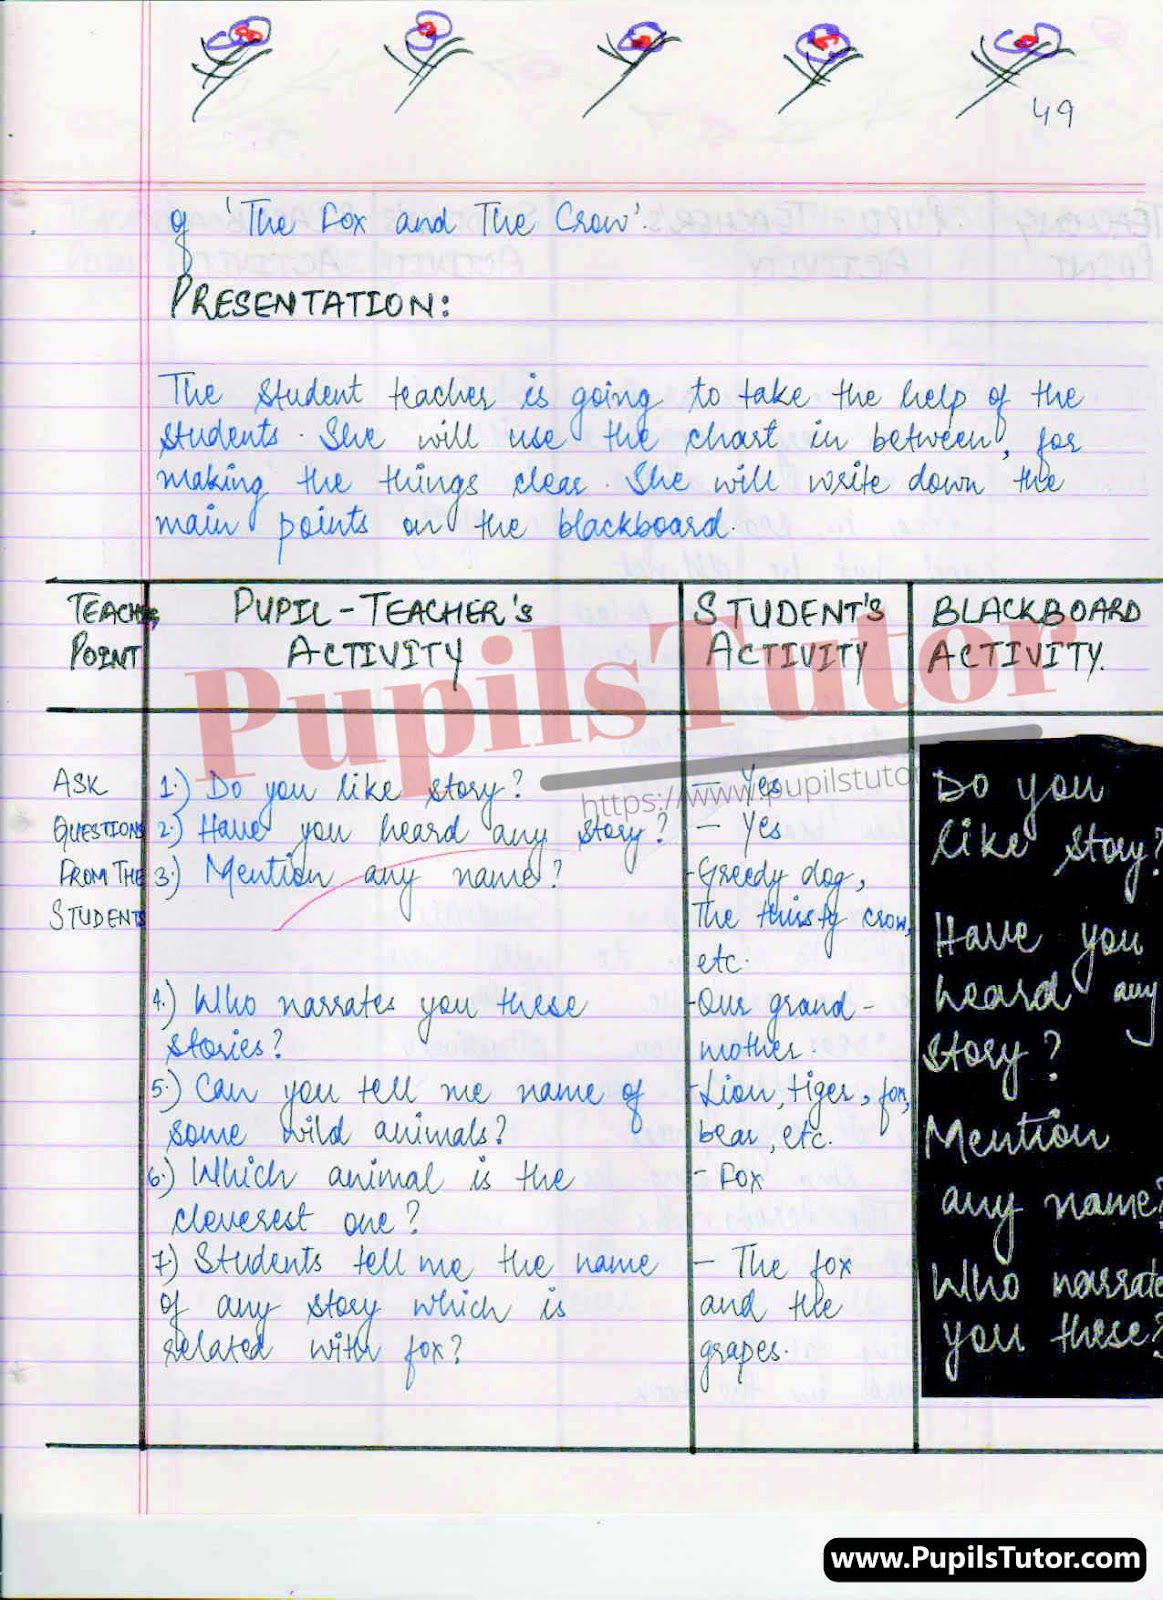 Class/Grade 2 English Lesson Plan On Fox And Crow (Story) For CBSE NCERT KVS School And University College Teachers – (Page And Image Number 3) – www.pupilstutor.com